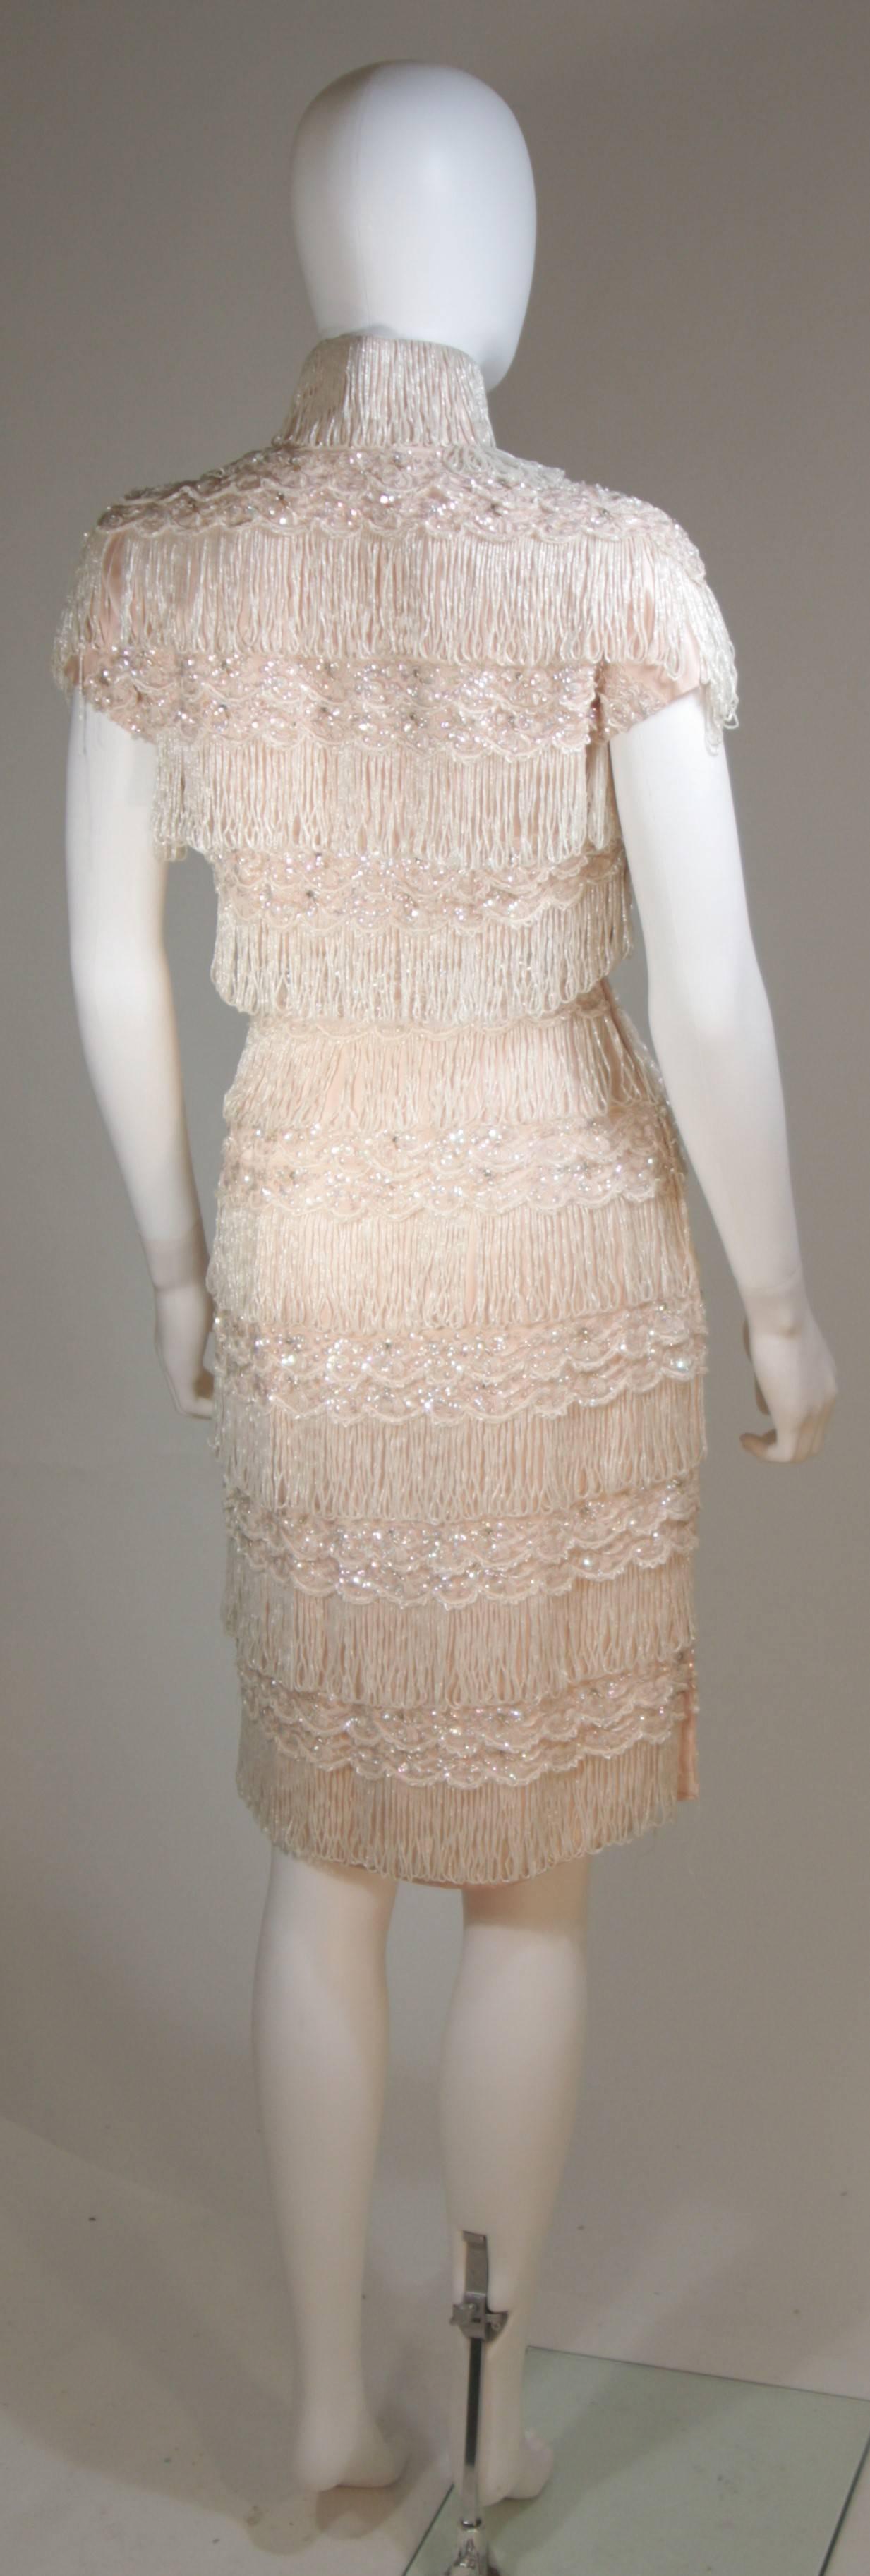 HAUTE COUTURE INTERNATIONAL Pink Silk Dress with Mandarin Collar and Fringe 2 3